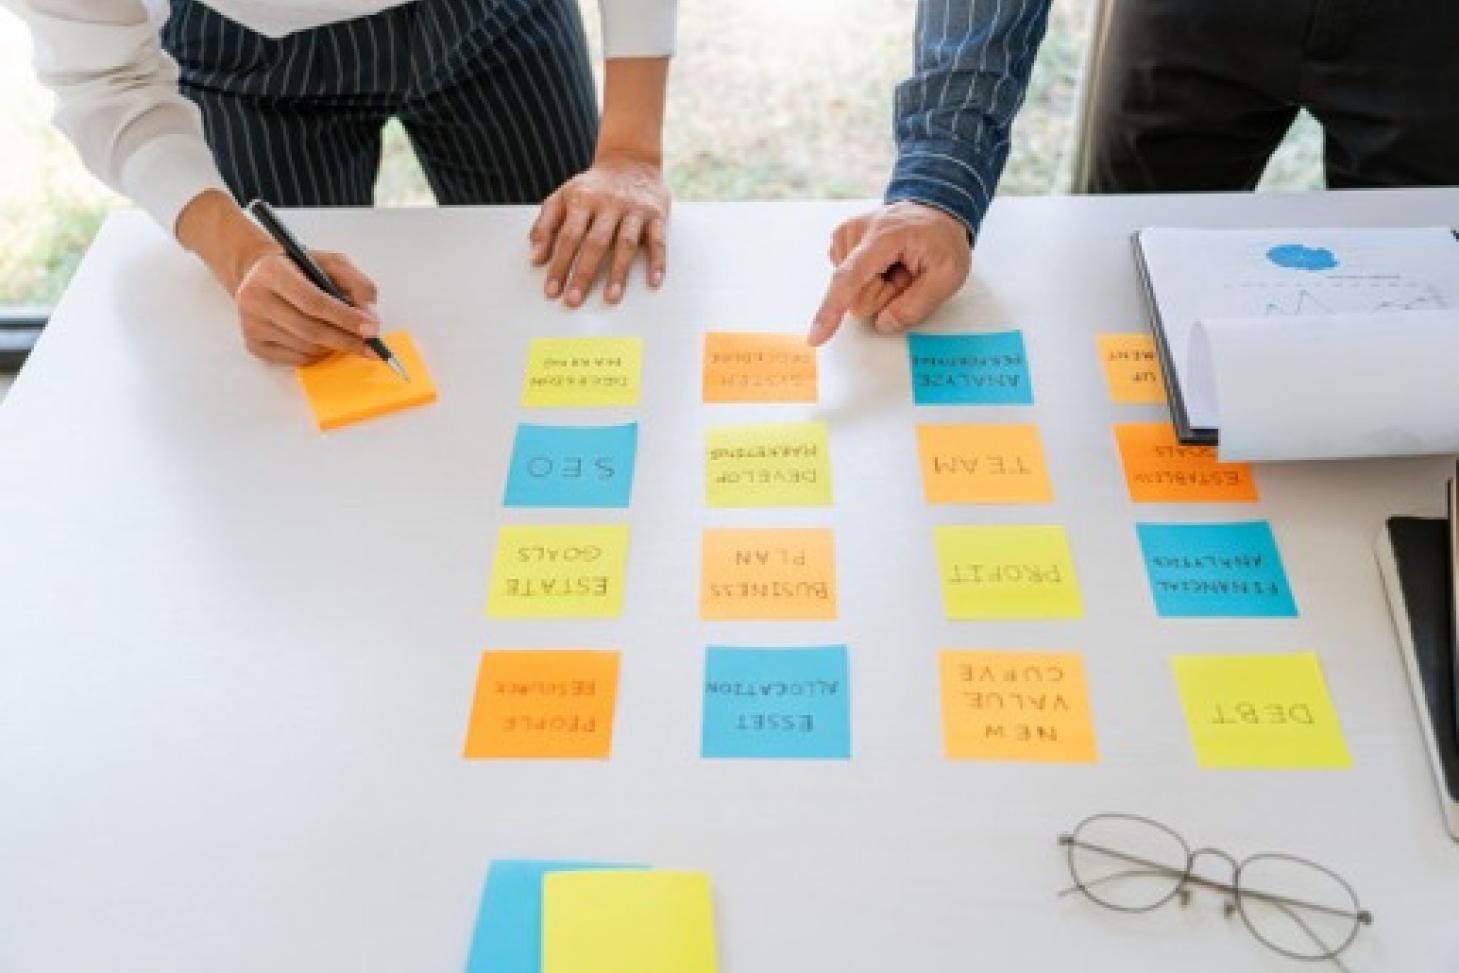 Strategy session with post-it notes